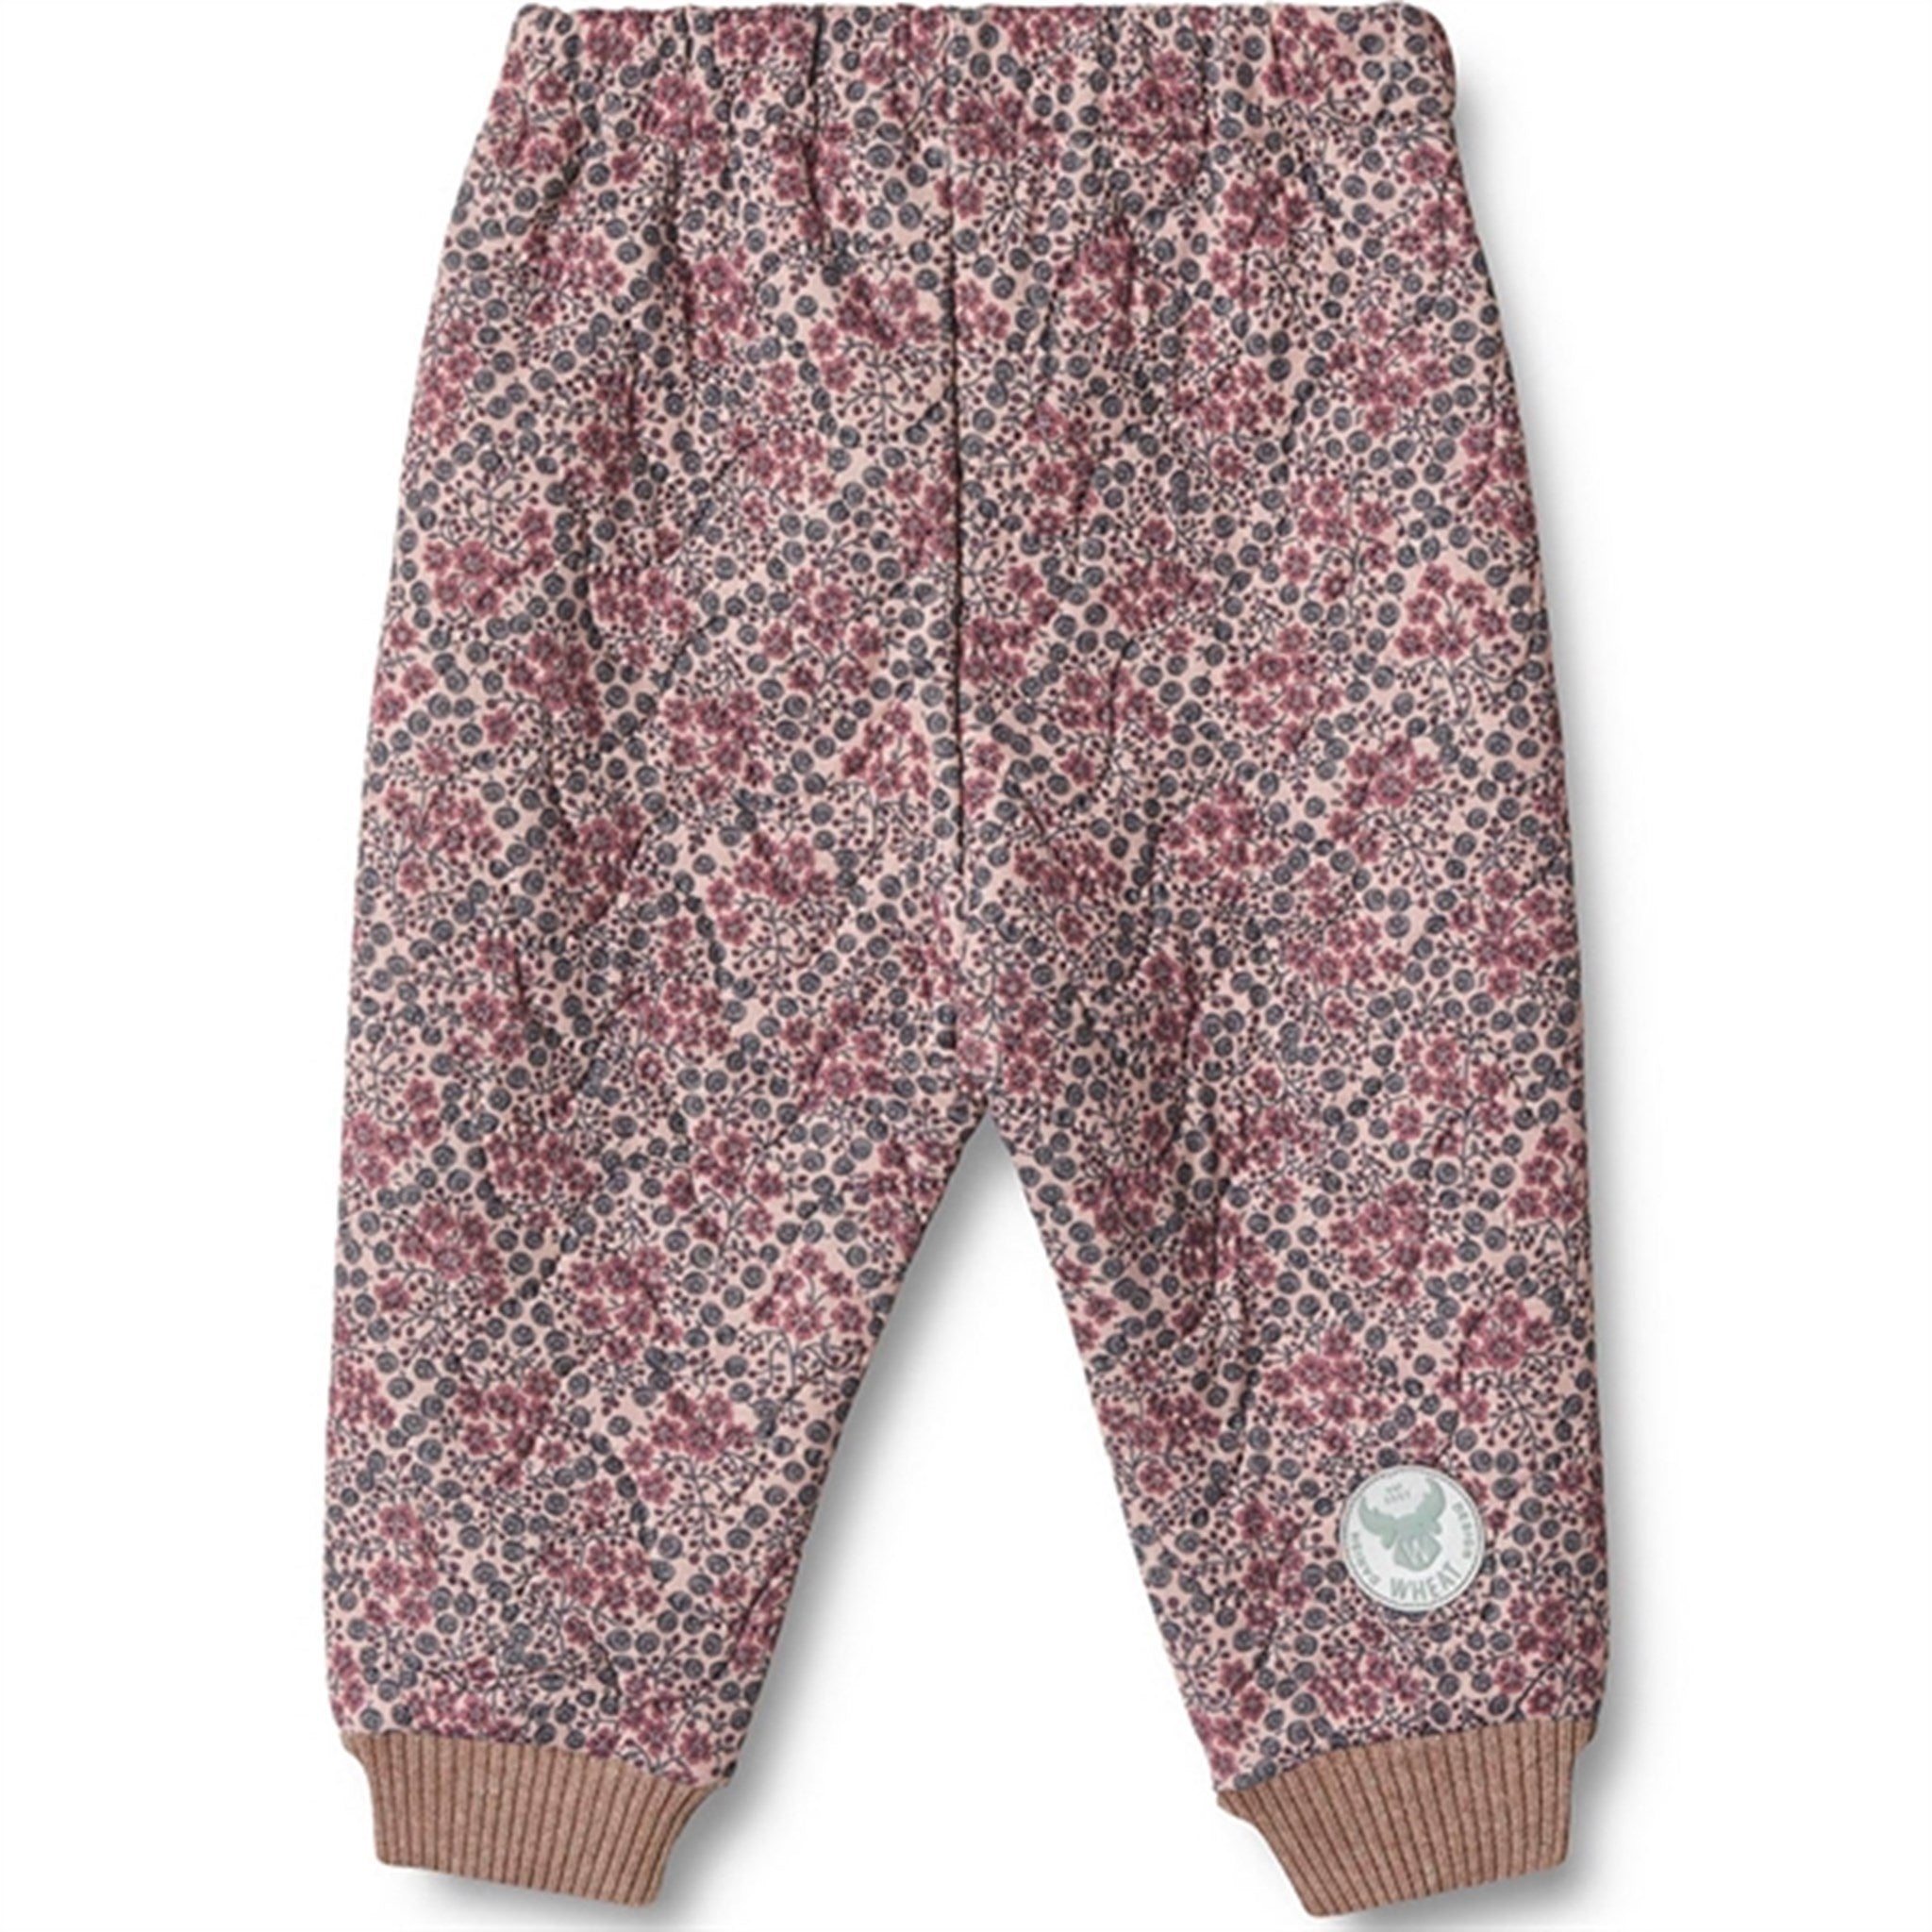 Wheat Thermo Harlequin Berries Pants Alex 2